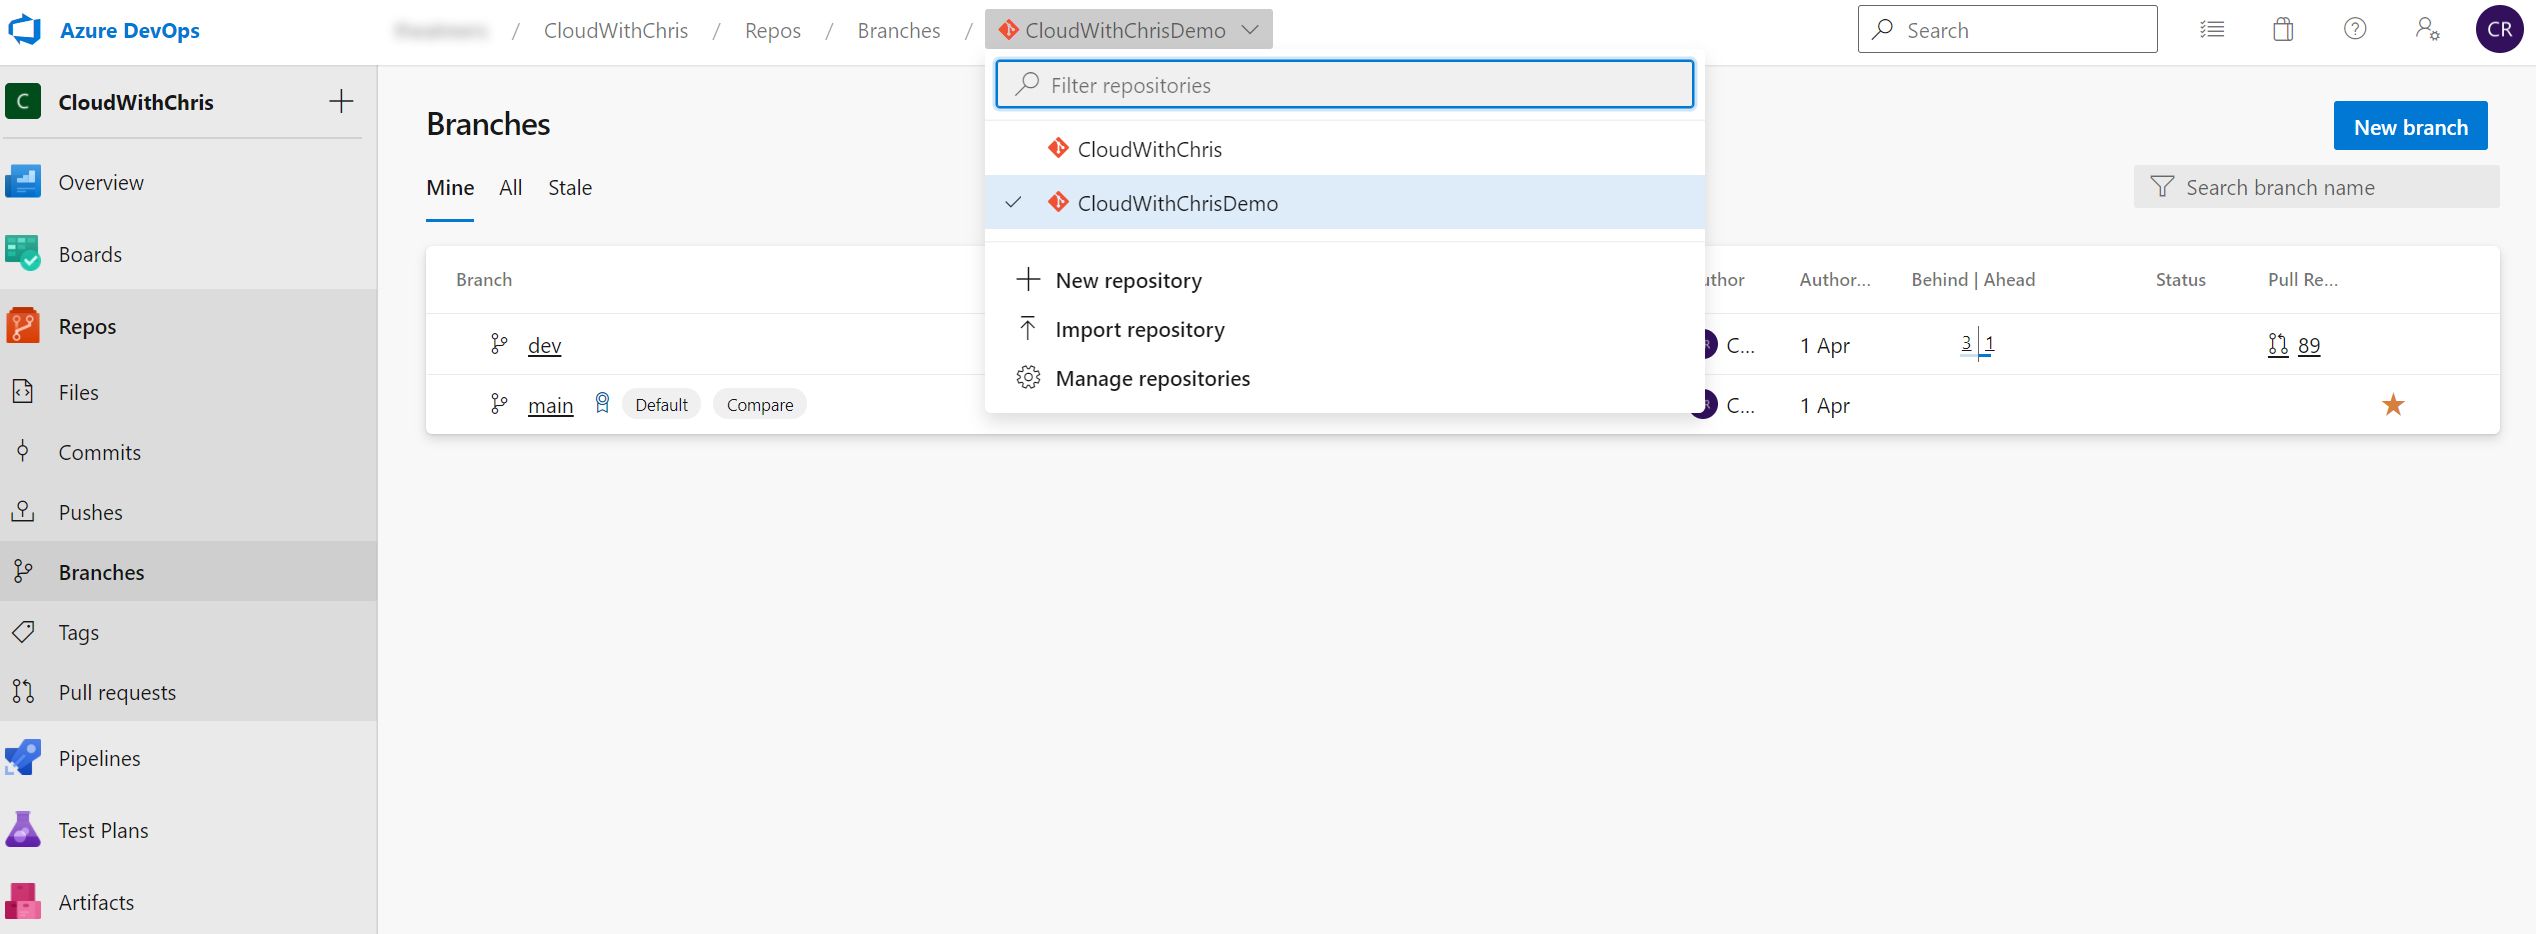 Screenshot showing multiple options for the Git Repository in the dropdown at the top of the Branches page in Azure Repos